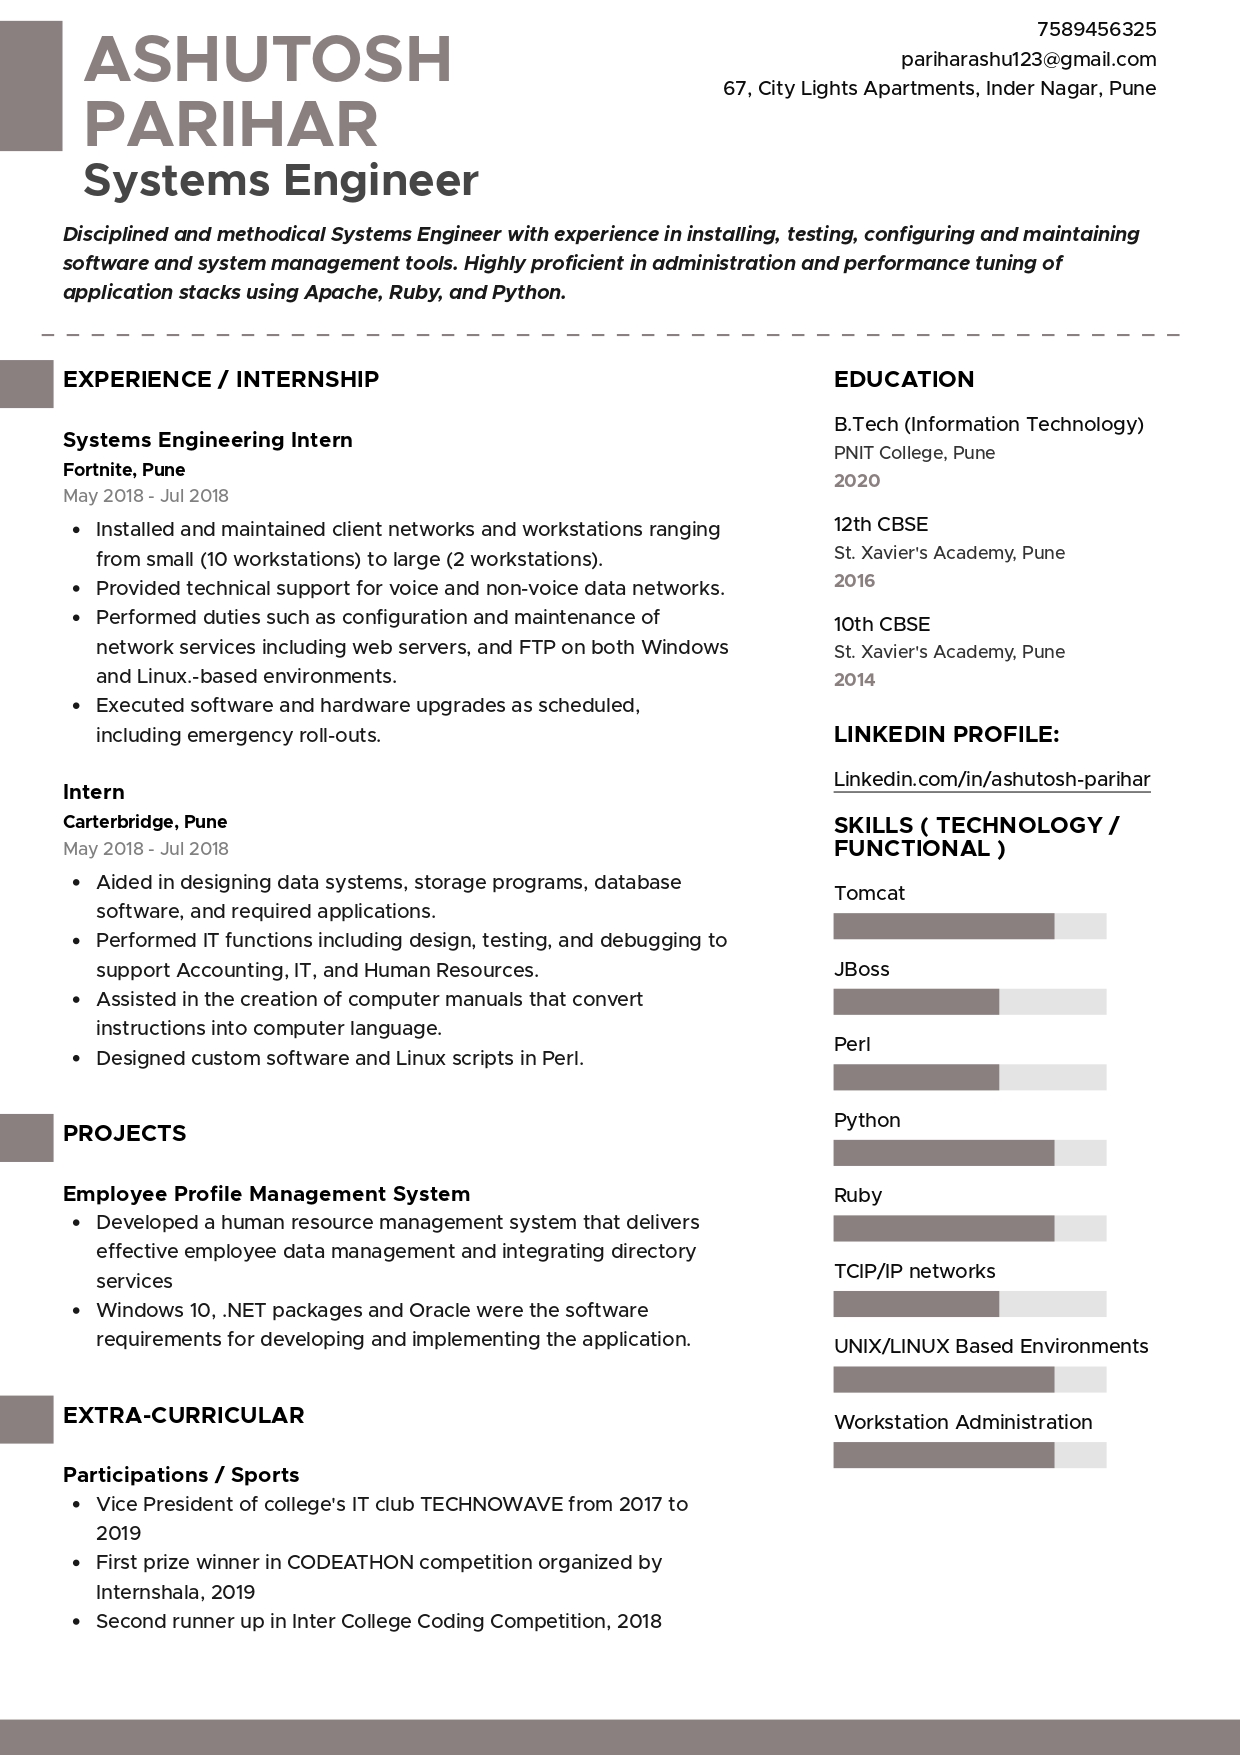 Resume of Systems Engineer